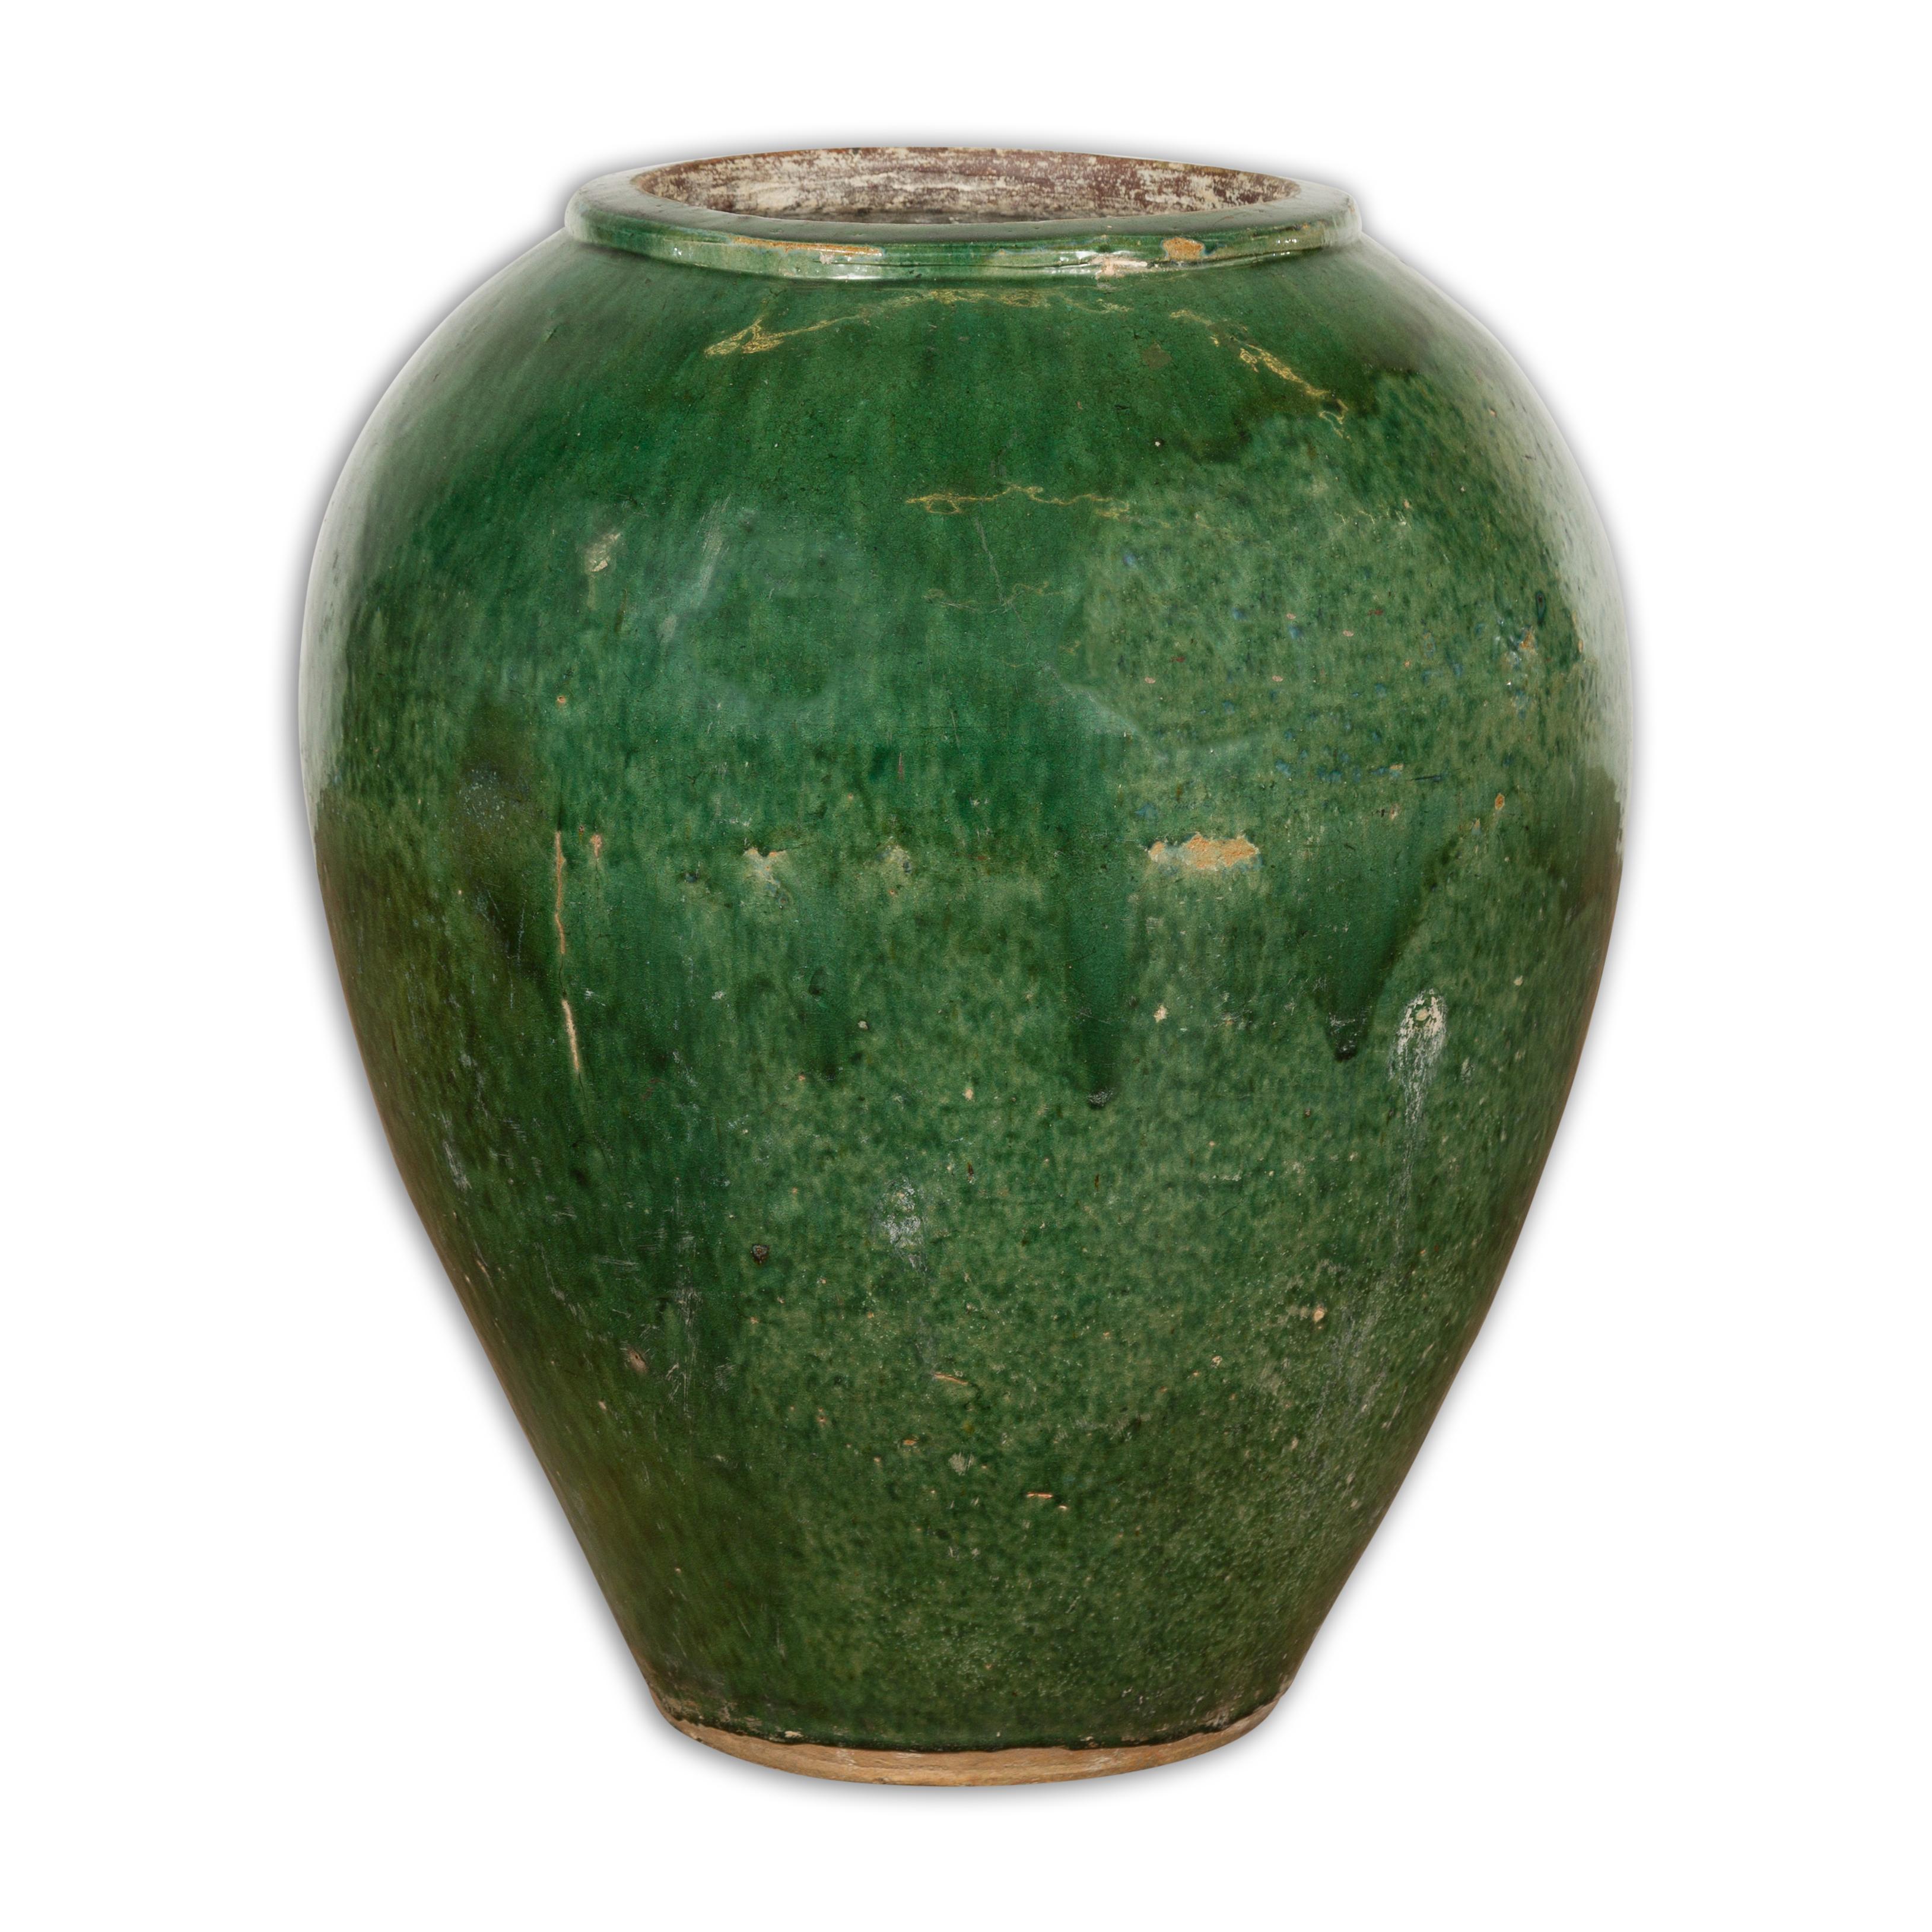 Large Vintage Chinese Vessel Planter with Green Glaze and Brown Accents 7